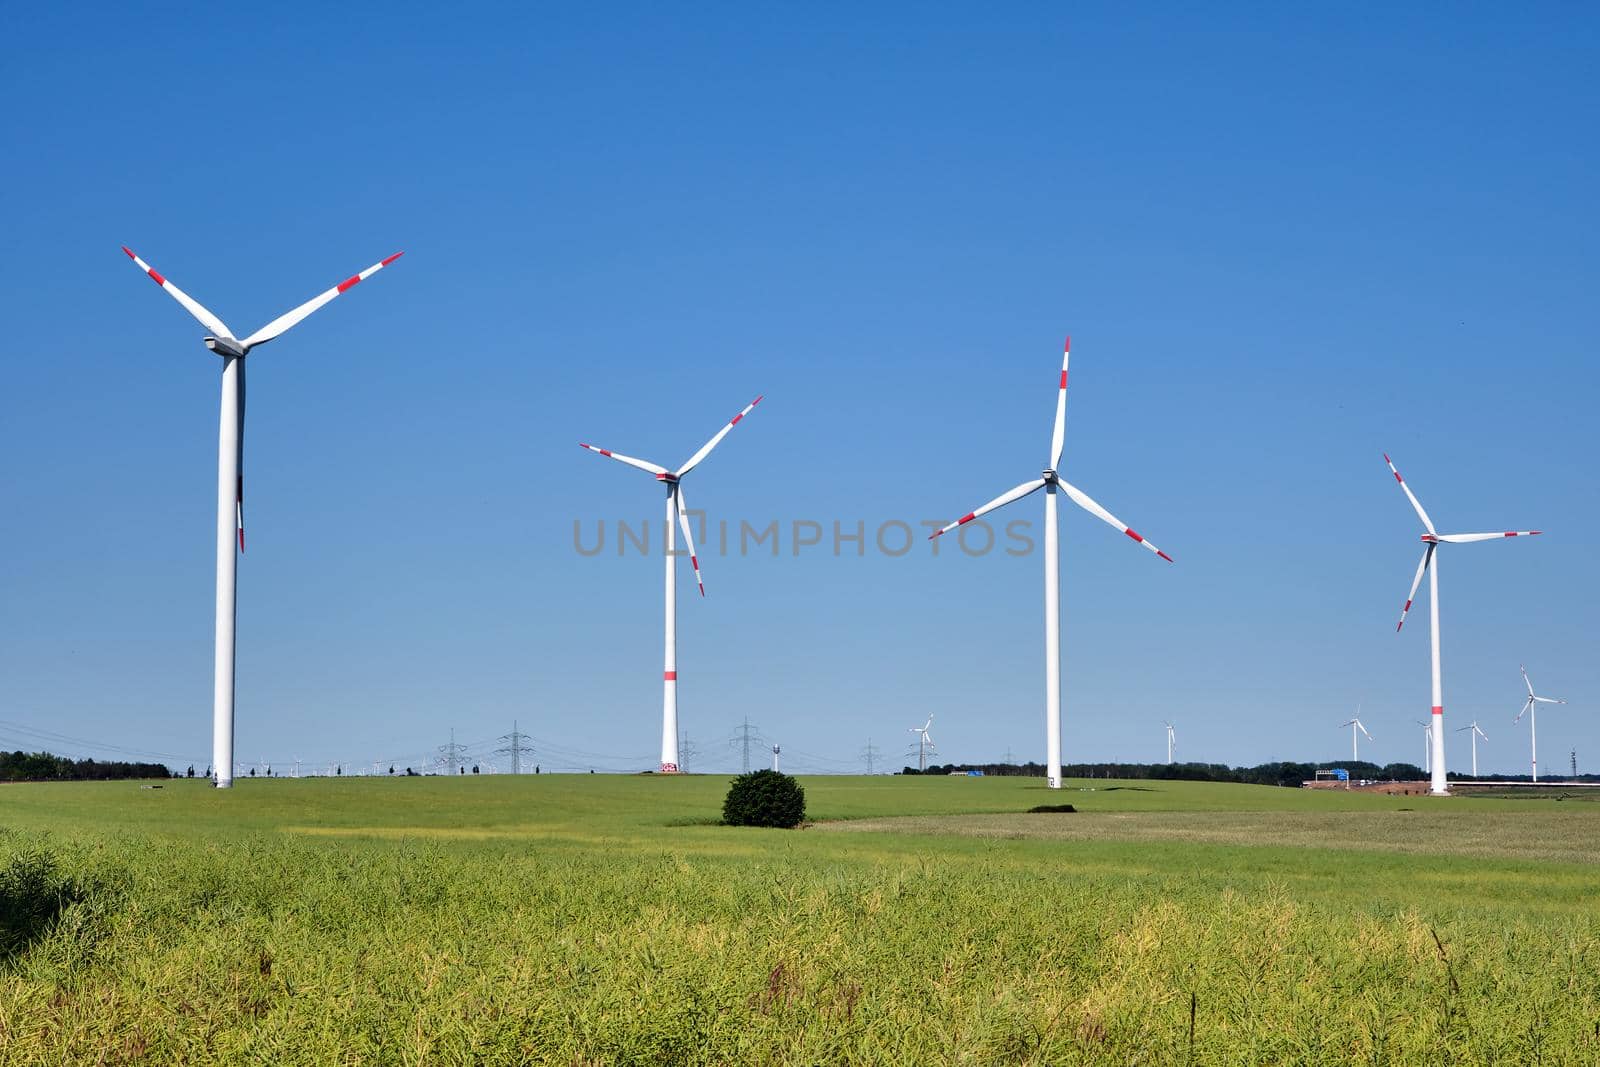 Wind turbines in front of a clear blue sky seen in Germany